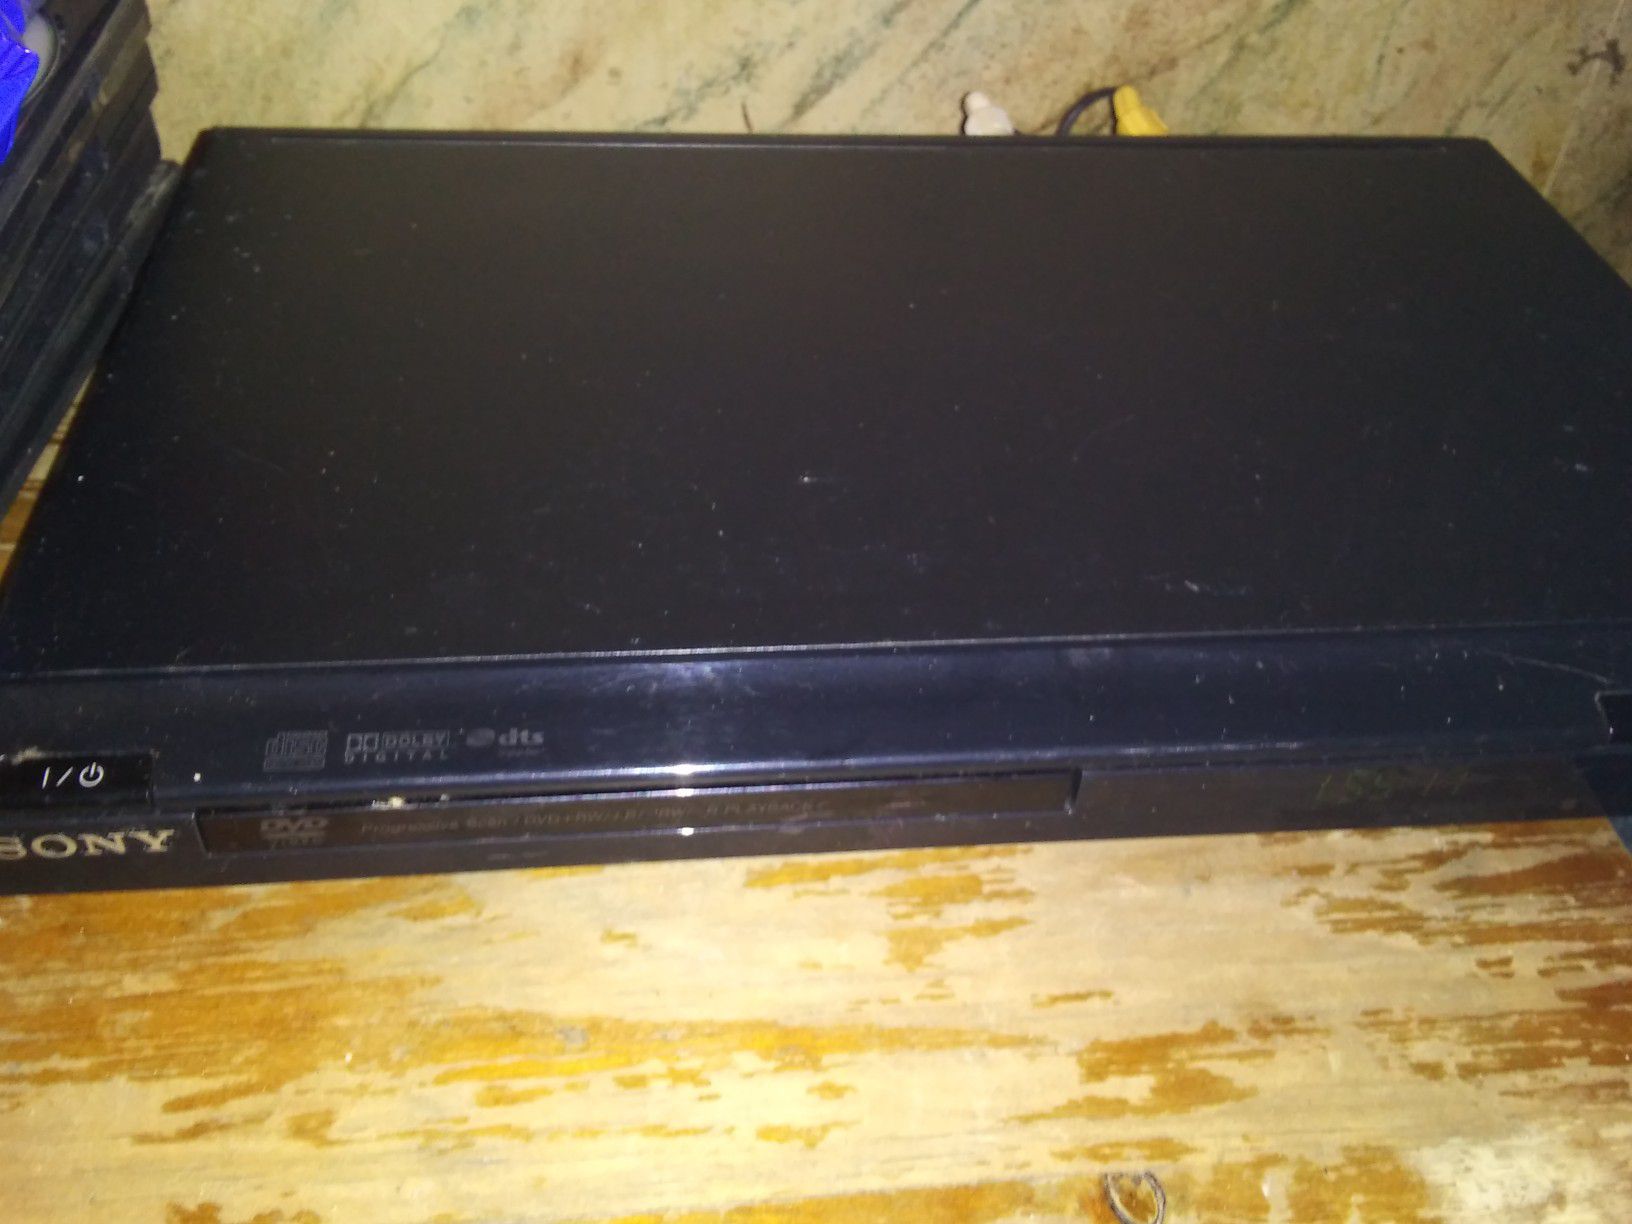 Sony dvd player with 50 DVDs with racks lot